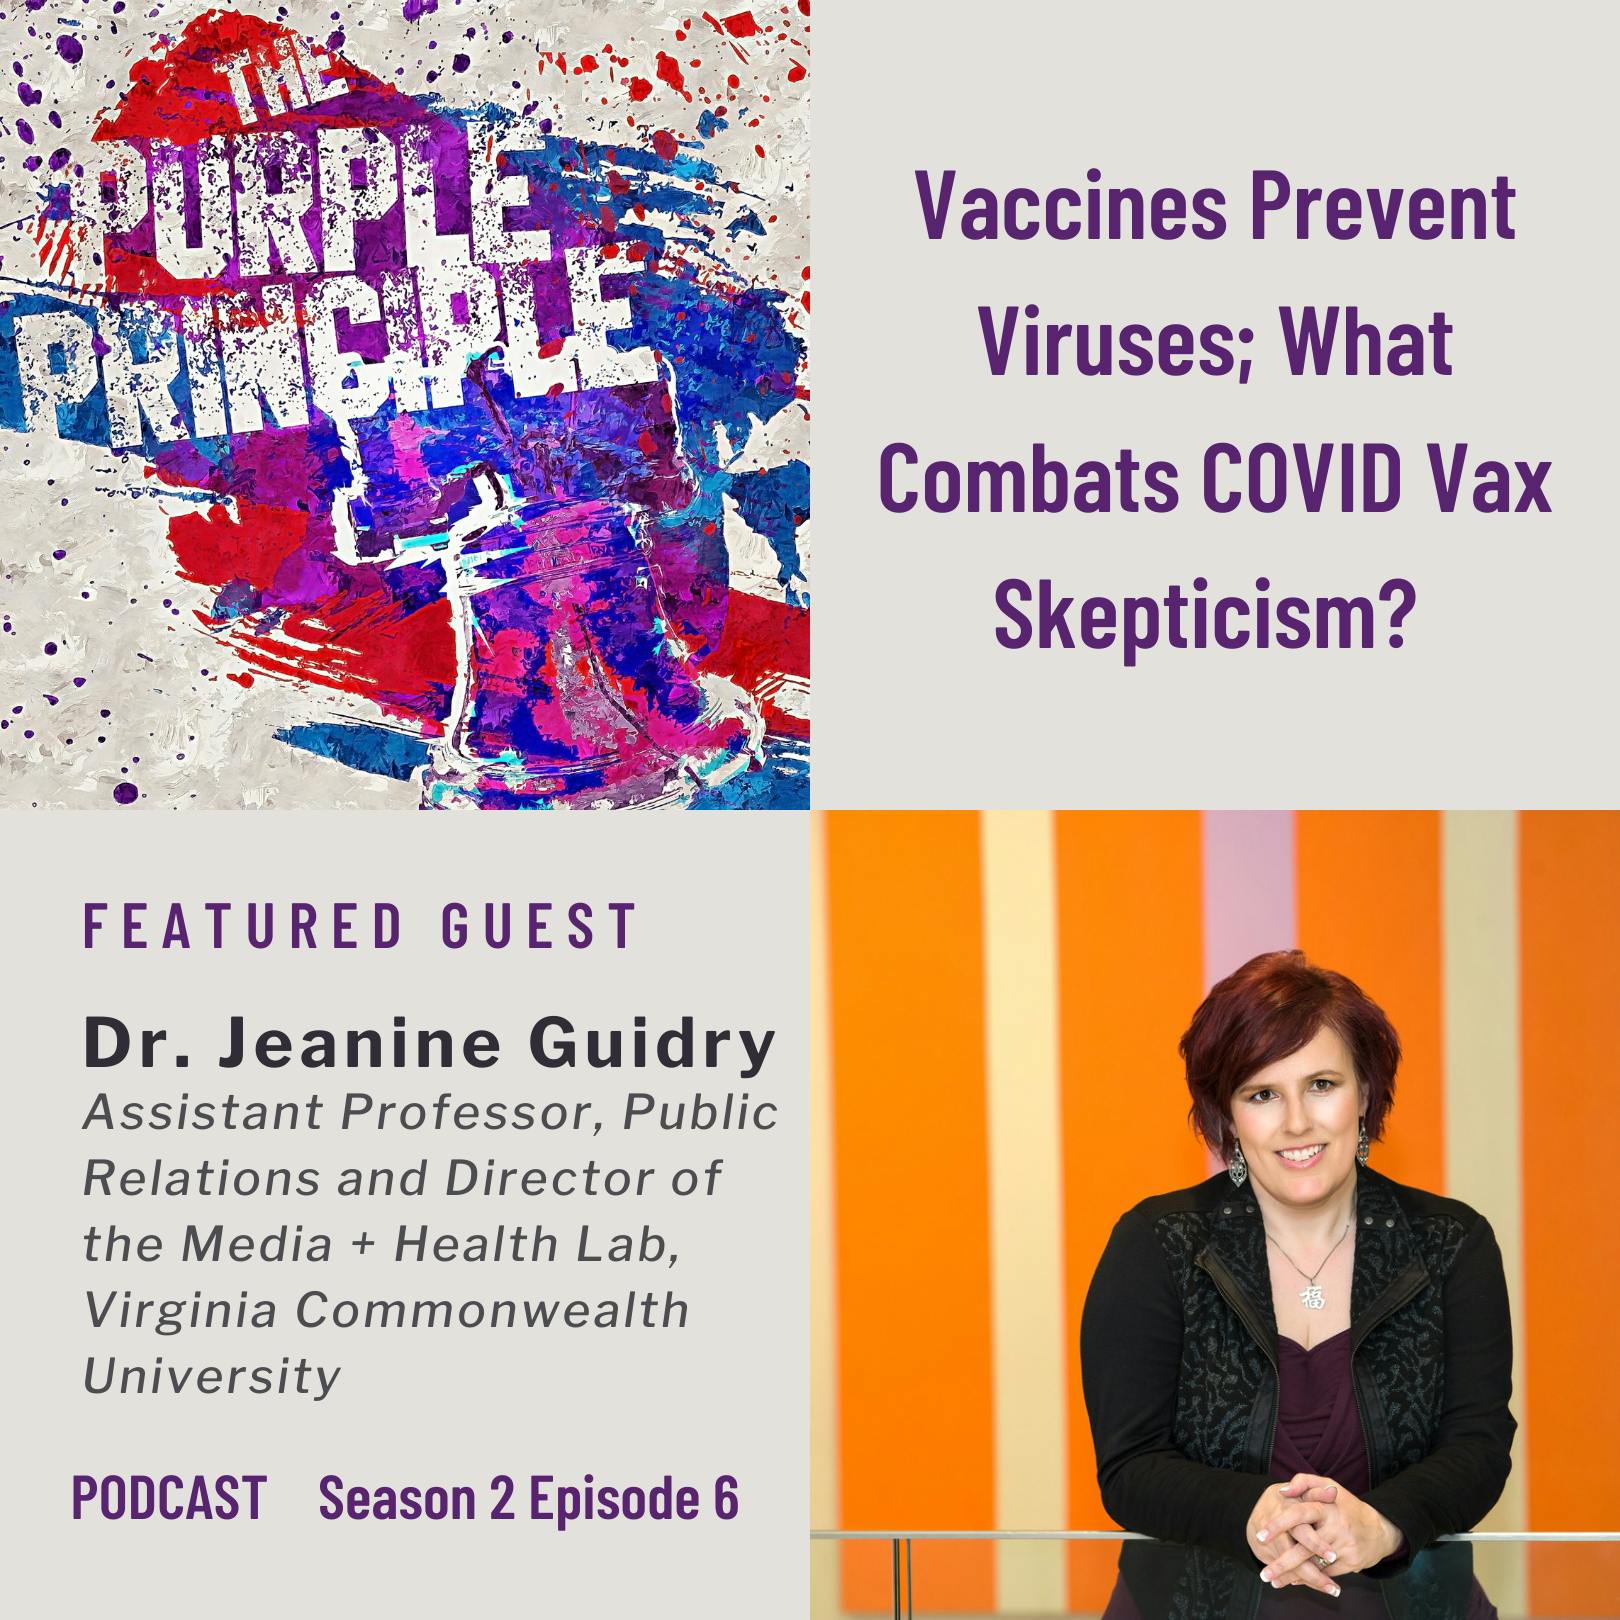 Vaccines Prevent Viruses; What Combats COVID Vax Skepticism? An Interview with Dr. Jeanine Guidry, Director of VCU’s Health & Media Lab